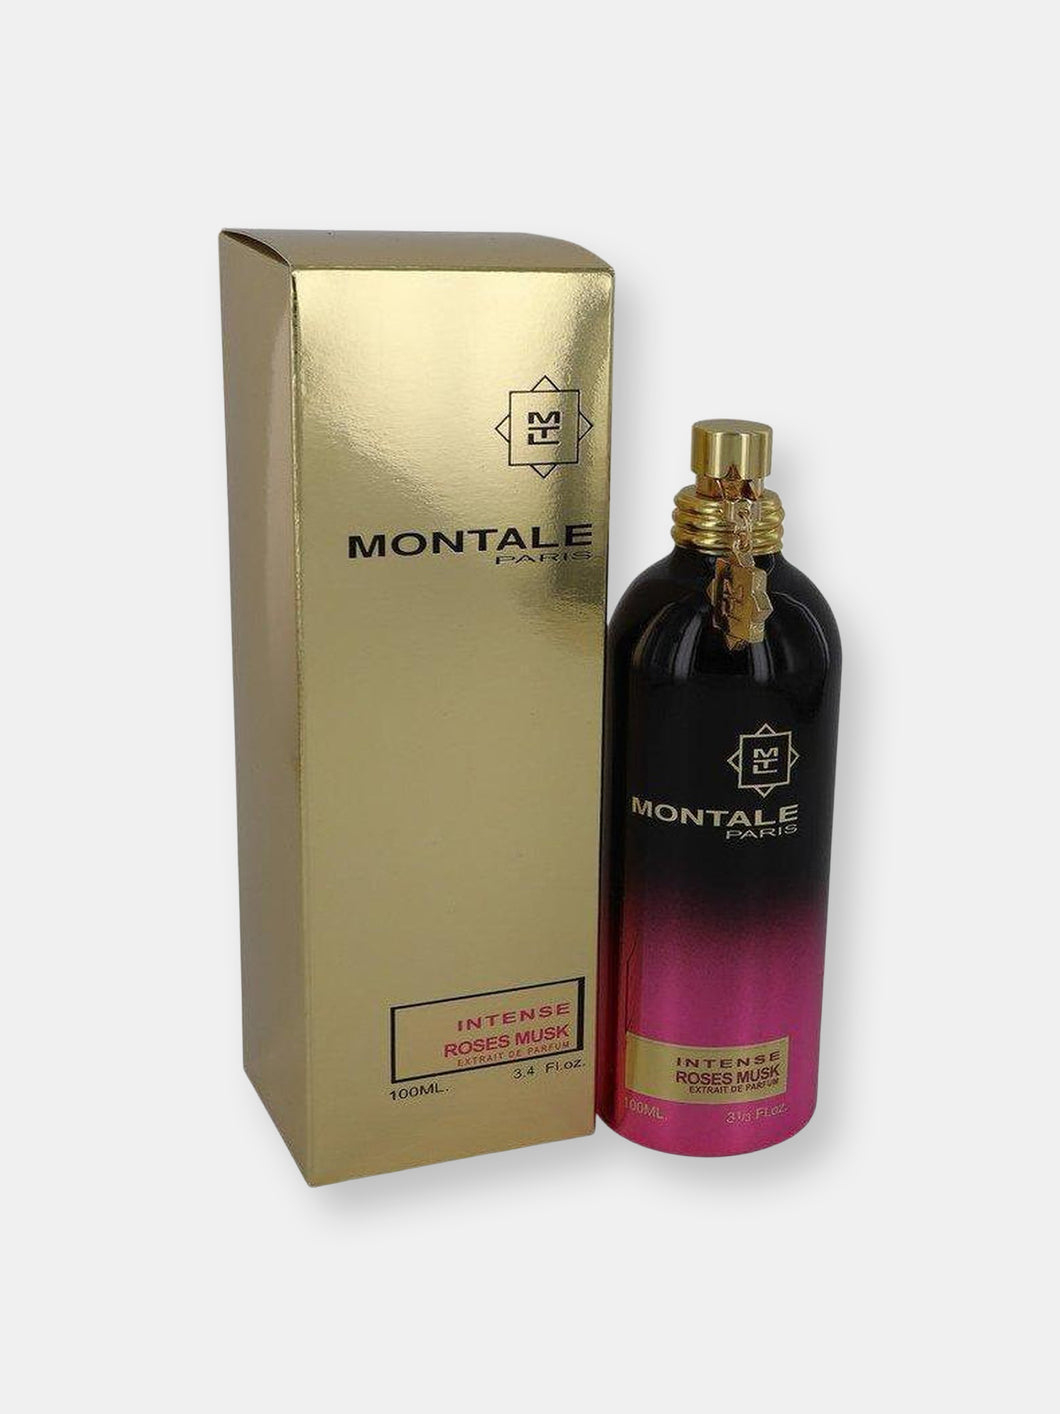 Montale Intense Roses Musk by Montale Extract De Parfum Spray 3.4 oz